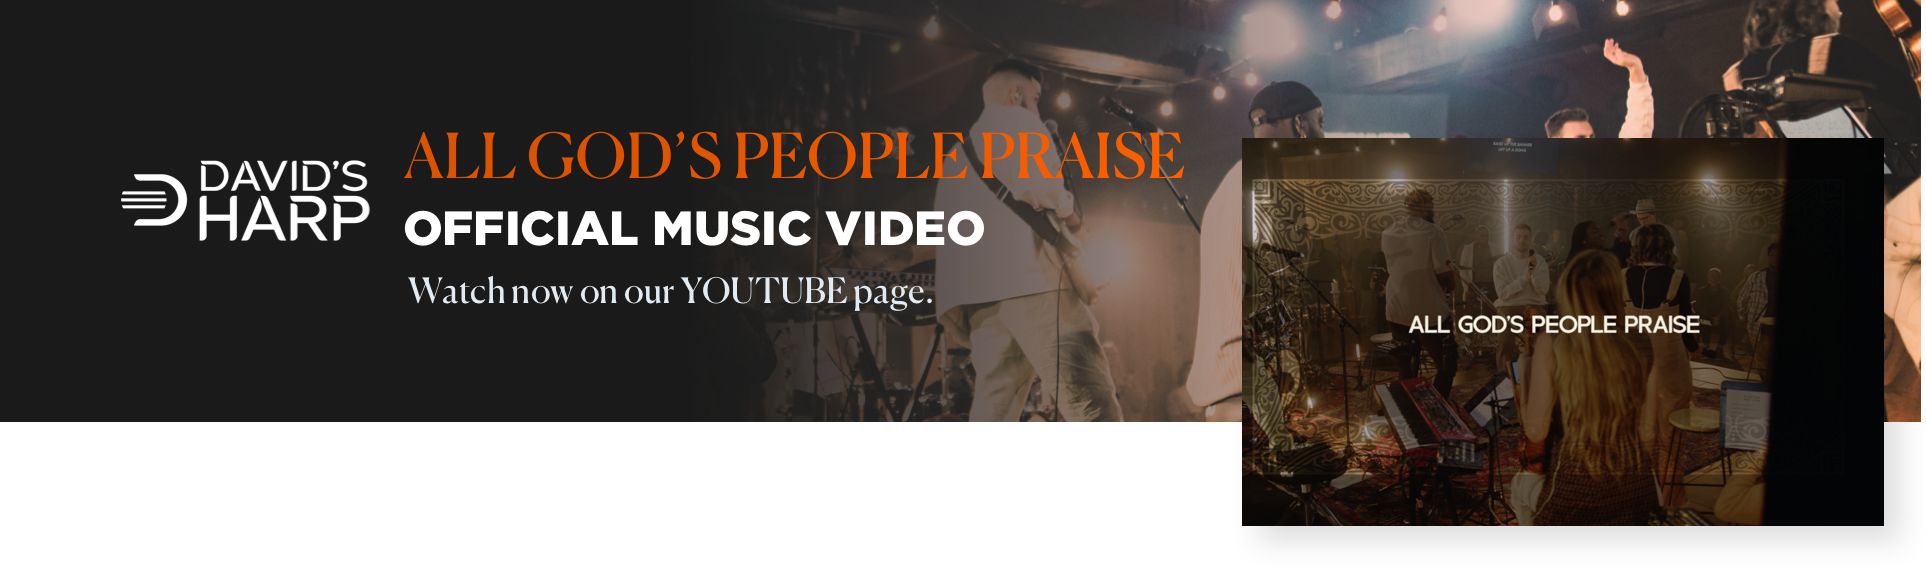 All God's People Praise - OFFICIAL MUSIC VIDEO